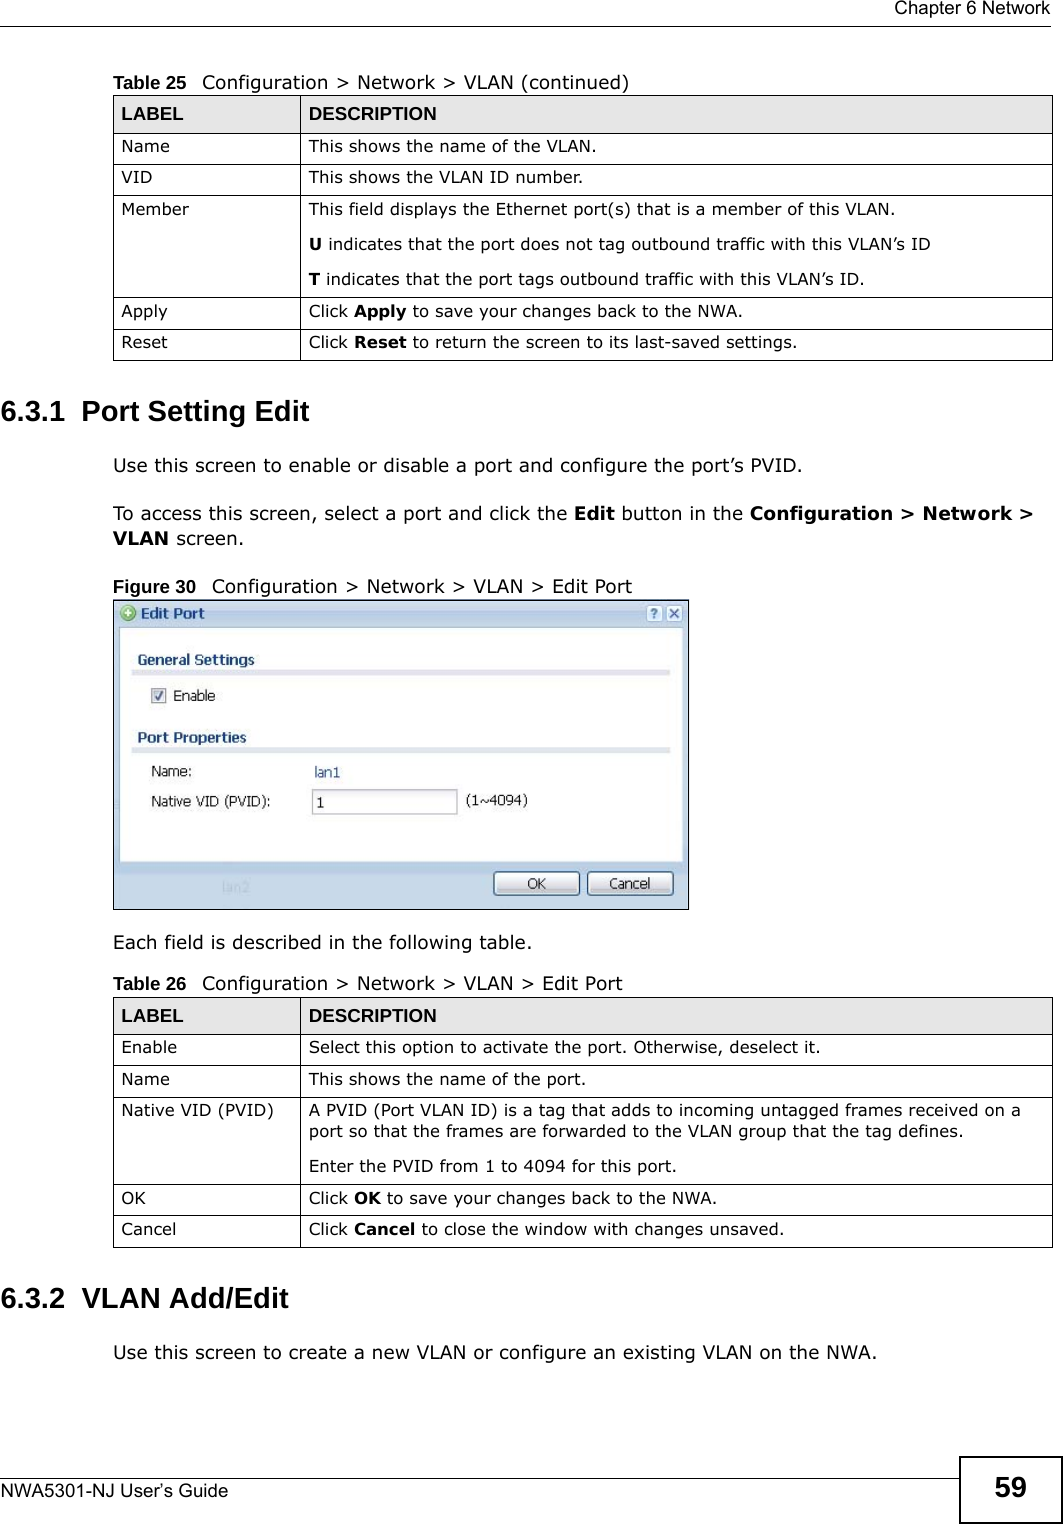  Chapter 6 NetworkNWA5301-NJ User’s Guide 596.3.1  Port Setting EditUse this screen to enable or disable a port and configure the port’s PVID.To access this screen, select a port and click the Edit button in the Configuration &gt; Network &gt; VLAN screen.Figure 30   Configuration &gt; Network &gt; VLAN &gt; Edit Port   Each field is described in the following table.  6.3.2  VLAN Add/EditUse this screen to create a new VLAN or configure an existing VLAN on the NWA.Name This shows the name of the VLAN.VID This shows the VLAN ID number.Member This field displays the Ethernet port(s) that is a member of this VLAN.U indicates that the port does not tag outbound traffic with this VLAN’s IDT indicates that the port tags outbound traffic with this VLAN’s ID.Apply Click Apply to save your changes back to the NWA.Reset Click Reset to return the screen to its last-saved settings. Table 25   Configuration &gt; Network &gt; VLAN (continued)LABEL  DESCRIPTIONTable 26   Configuration &gt; Network &gt; VLAN &gt; Edit PortLABEL  DESCRIPTIONEnable Select this option to activate the port. Otherwise, deselect it.Name This shows the name of the port.Native VID (PVID) A PVID (Port VLAN ID) is a tag that adds to incoming untagged frames received on a port so that the frames are forwarded to the VLAN group that the tag defines.Enter the PVID from 1 to 4094 for this port.OK Click OK to save your changes back to the NWA.Cancel Click Cancel to close the window with changes unsaved. 